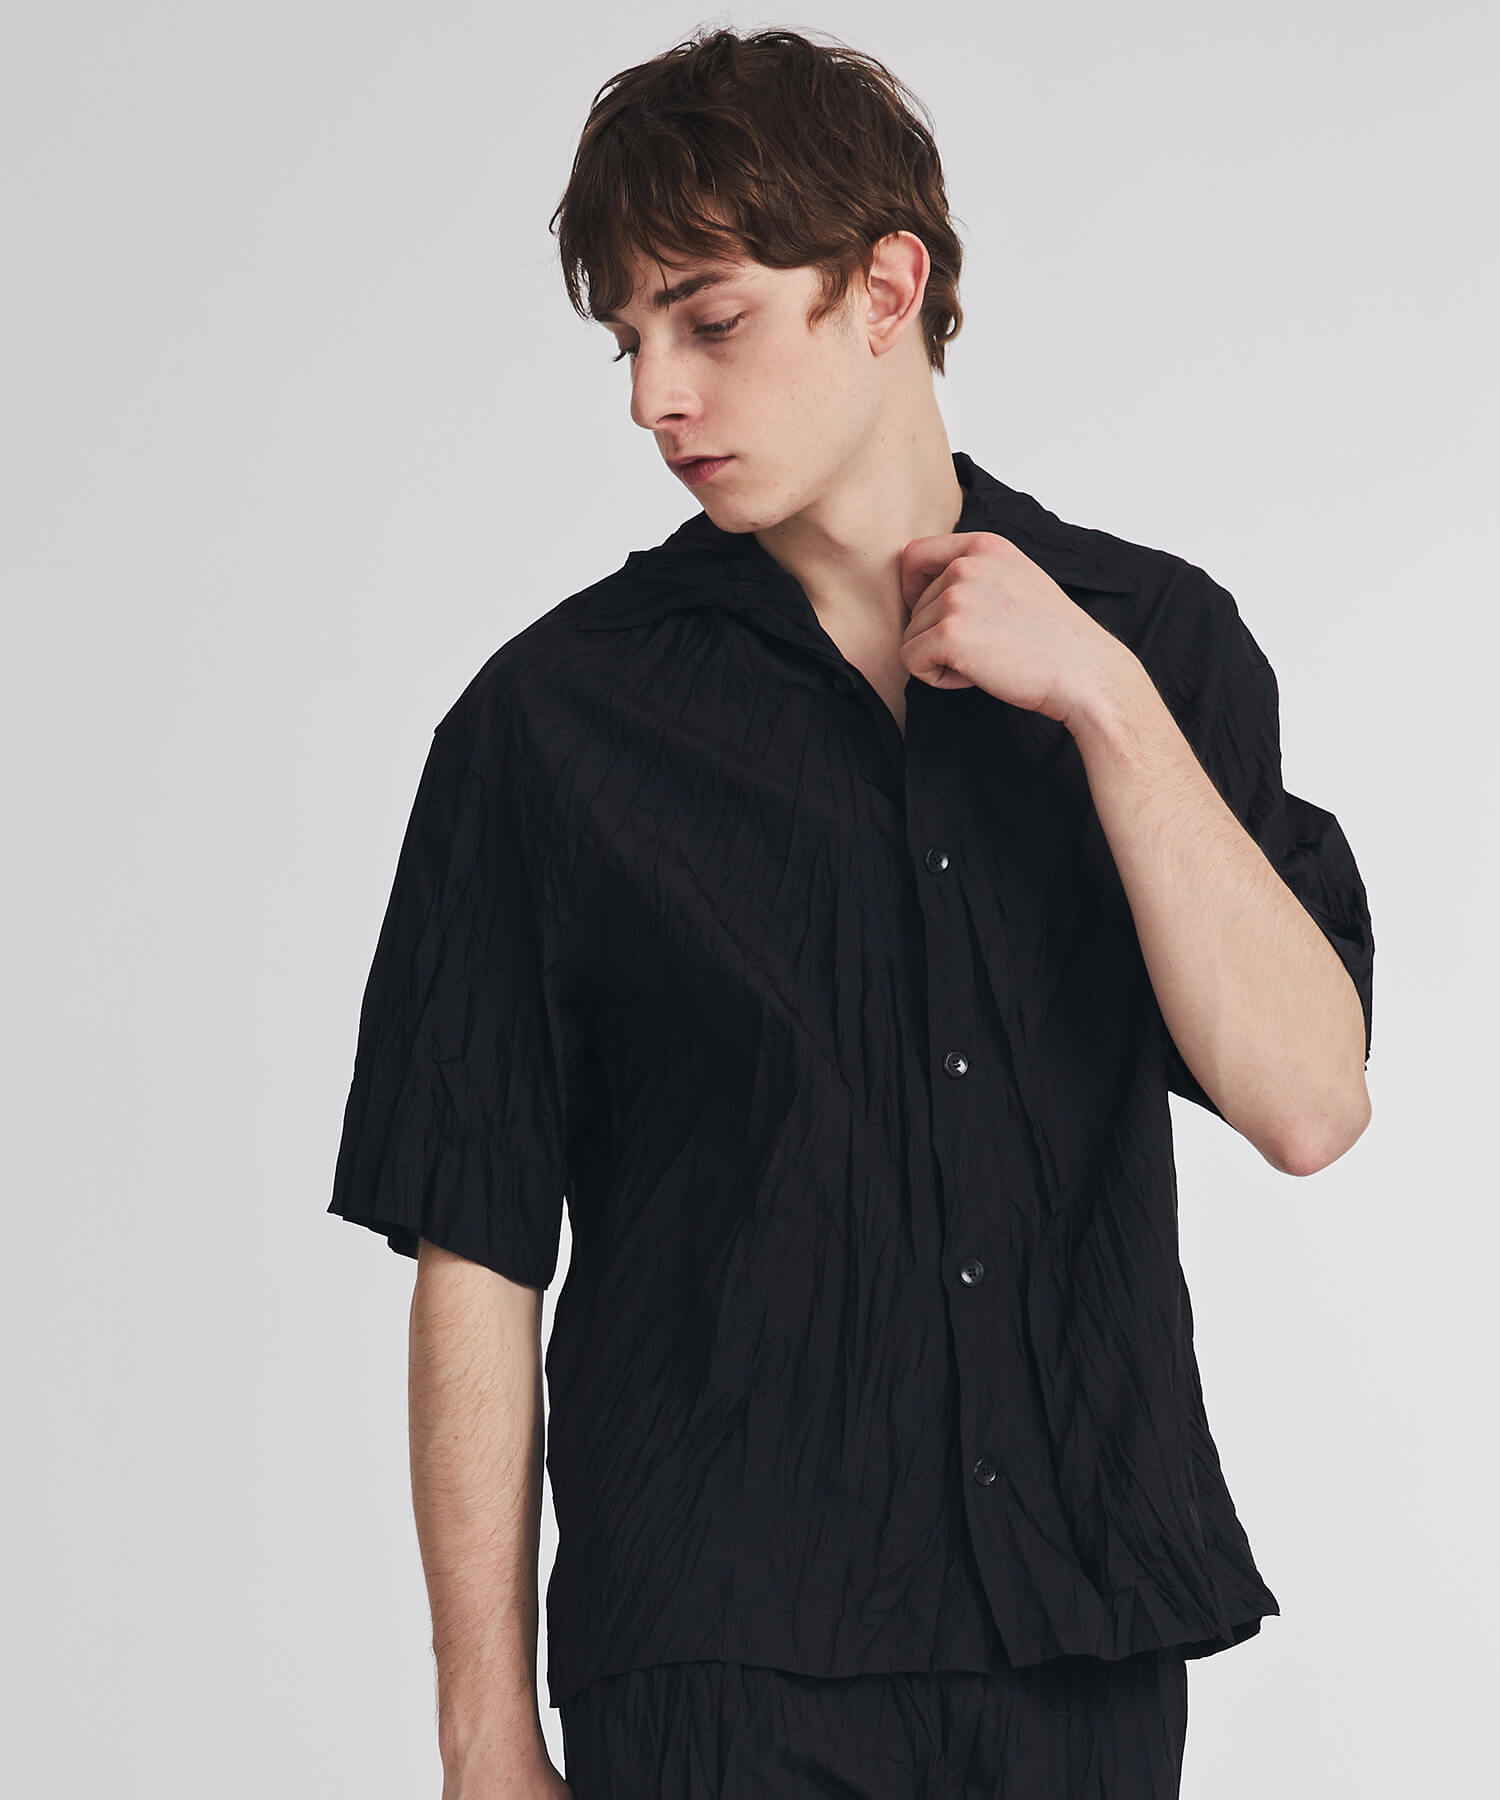 TH PRODUCTS - OPEN COLLAR SHIRT (BLK) | www.innoveering.net